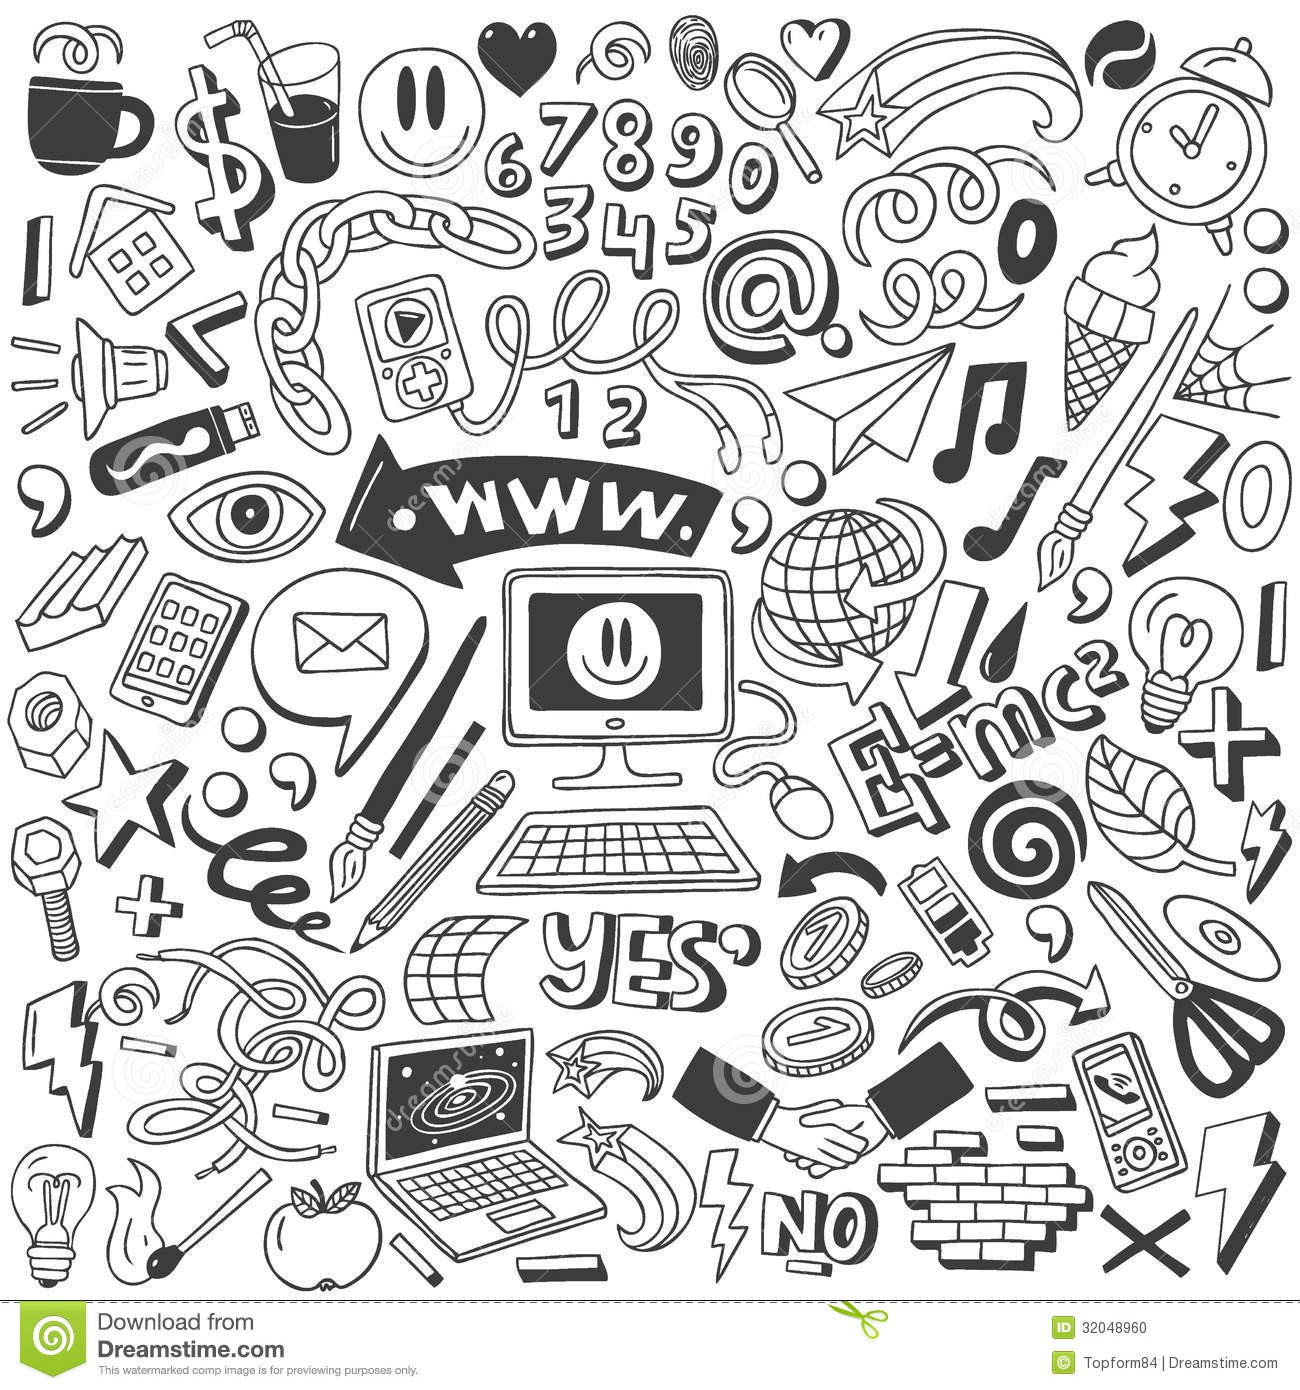 Doodles For Teenage Boys Coloring Pages
 Web doodles collection stock vector Illustration of chain